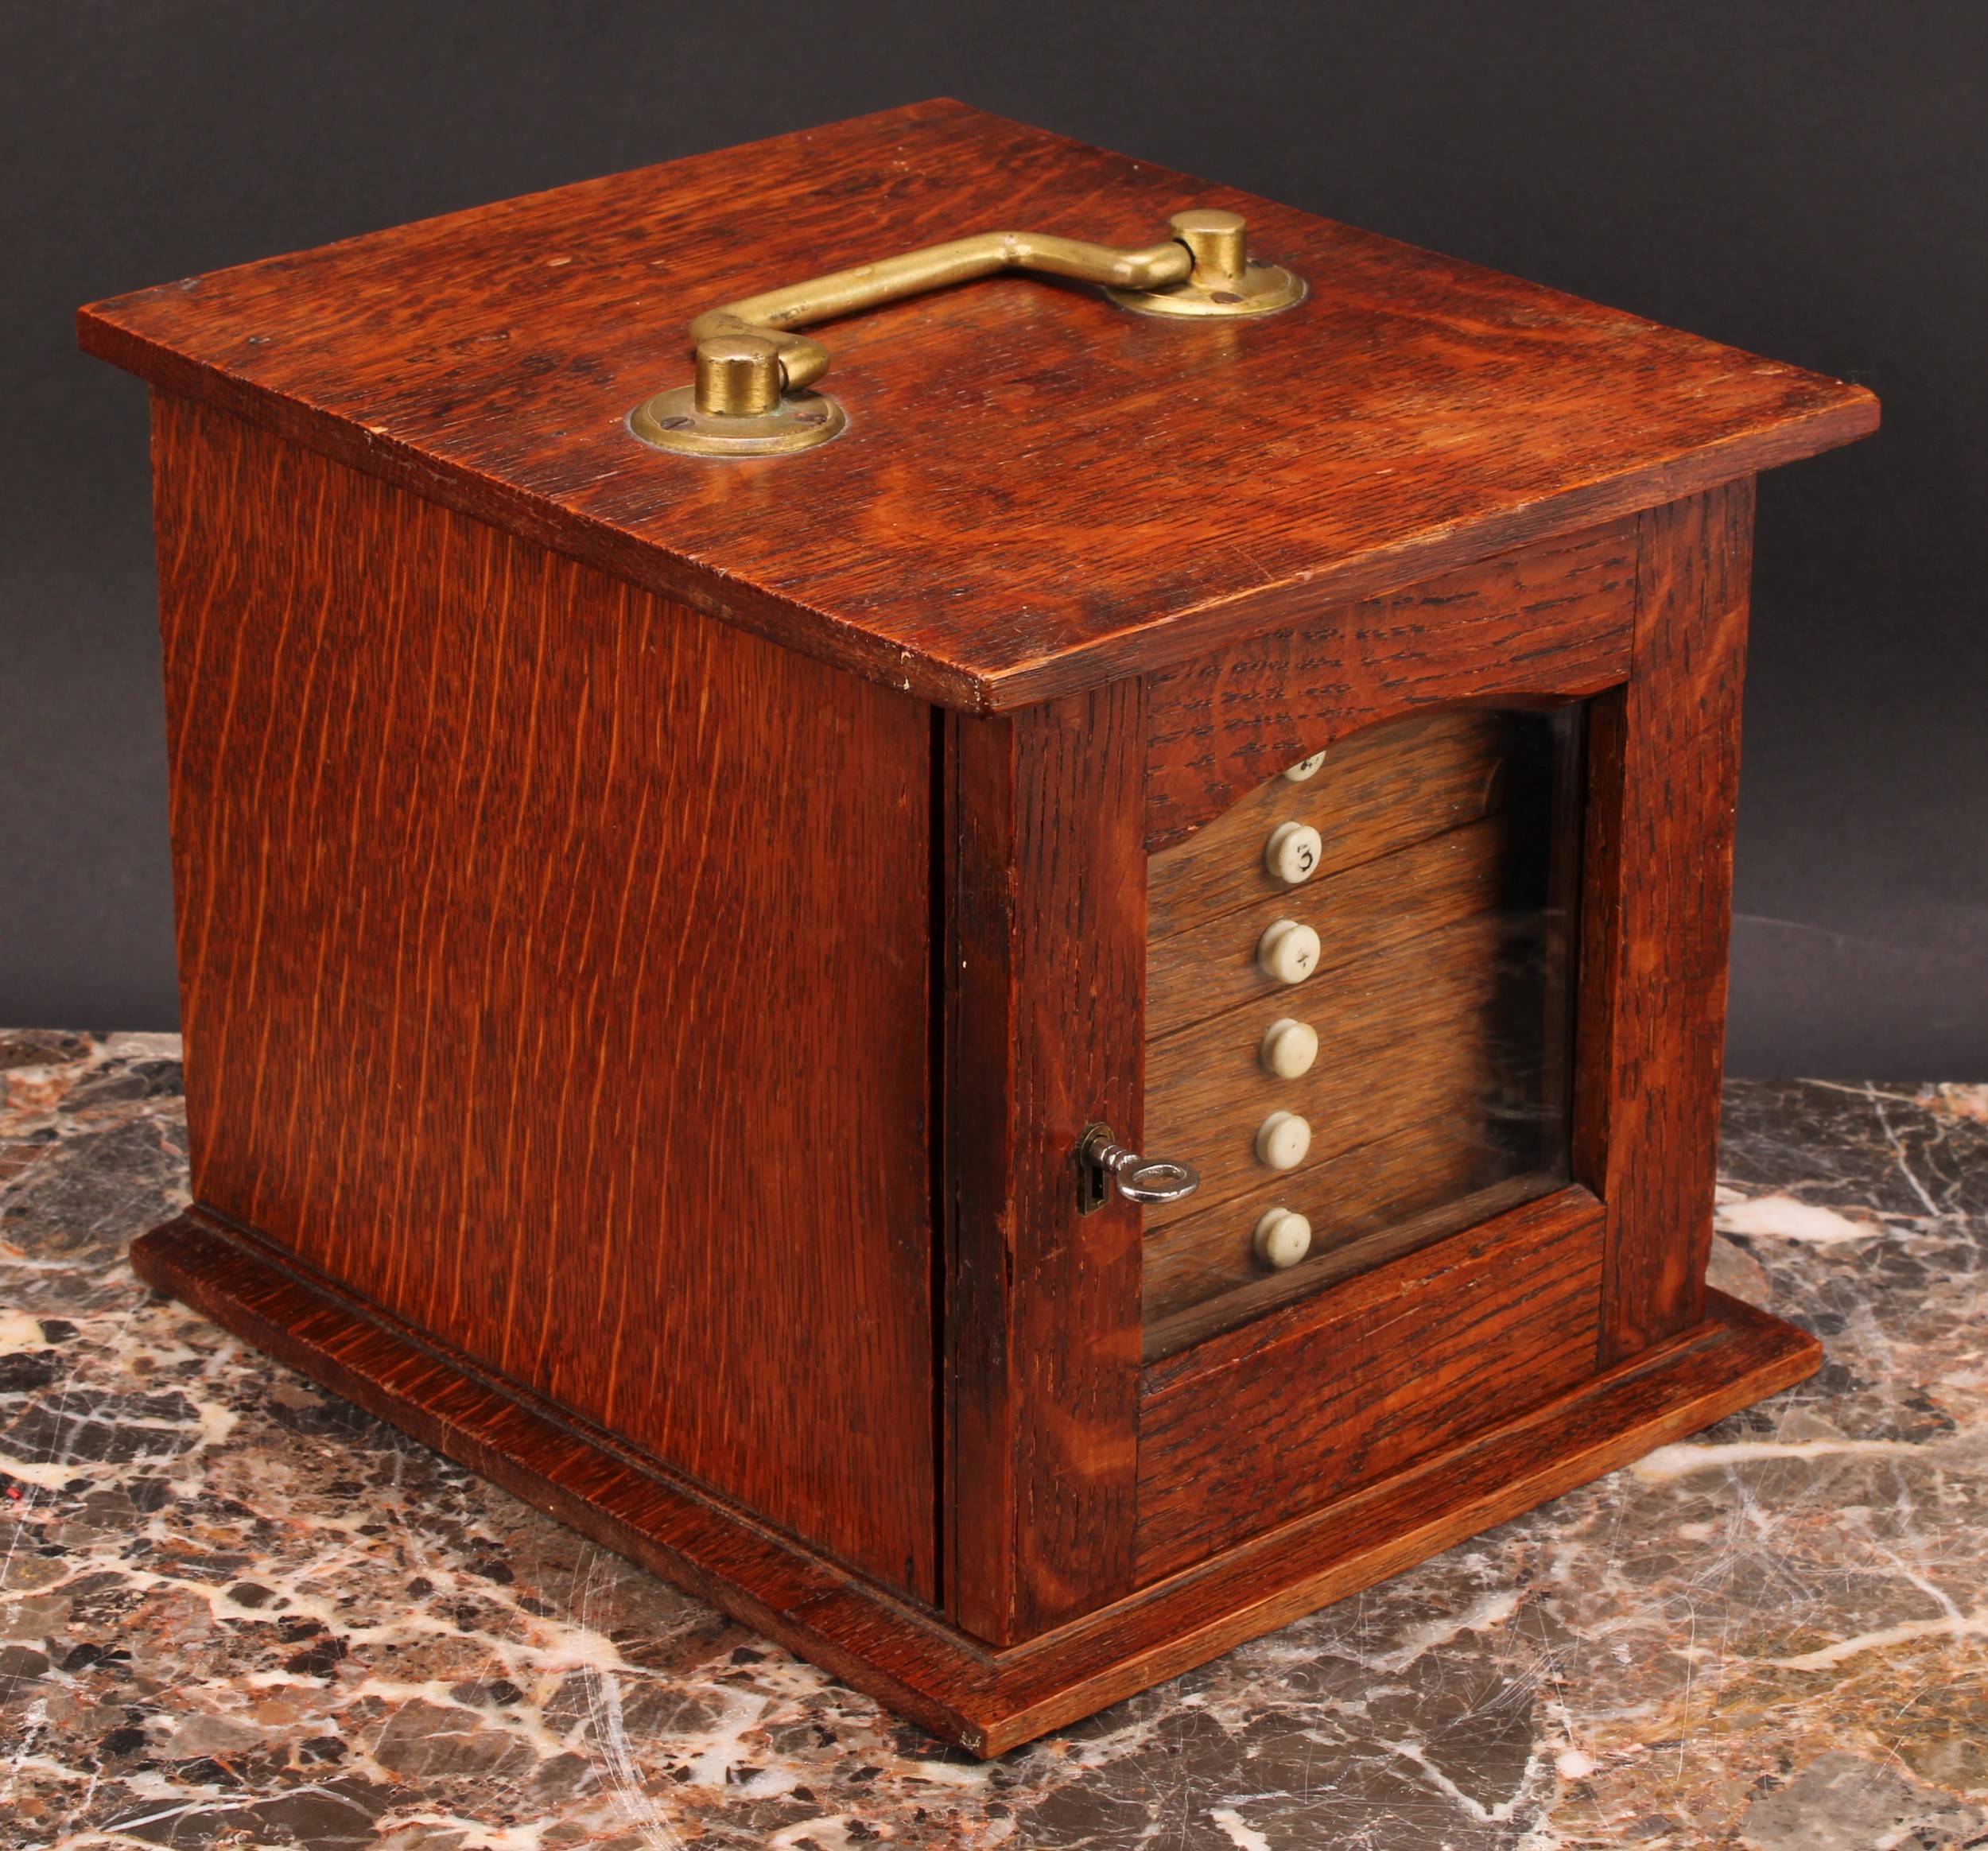 Numismatics - An Edwardian Arts and Crafts oak coin cabinet, the oversailing rectangular top with - Image 2 of 3